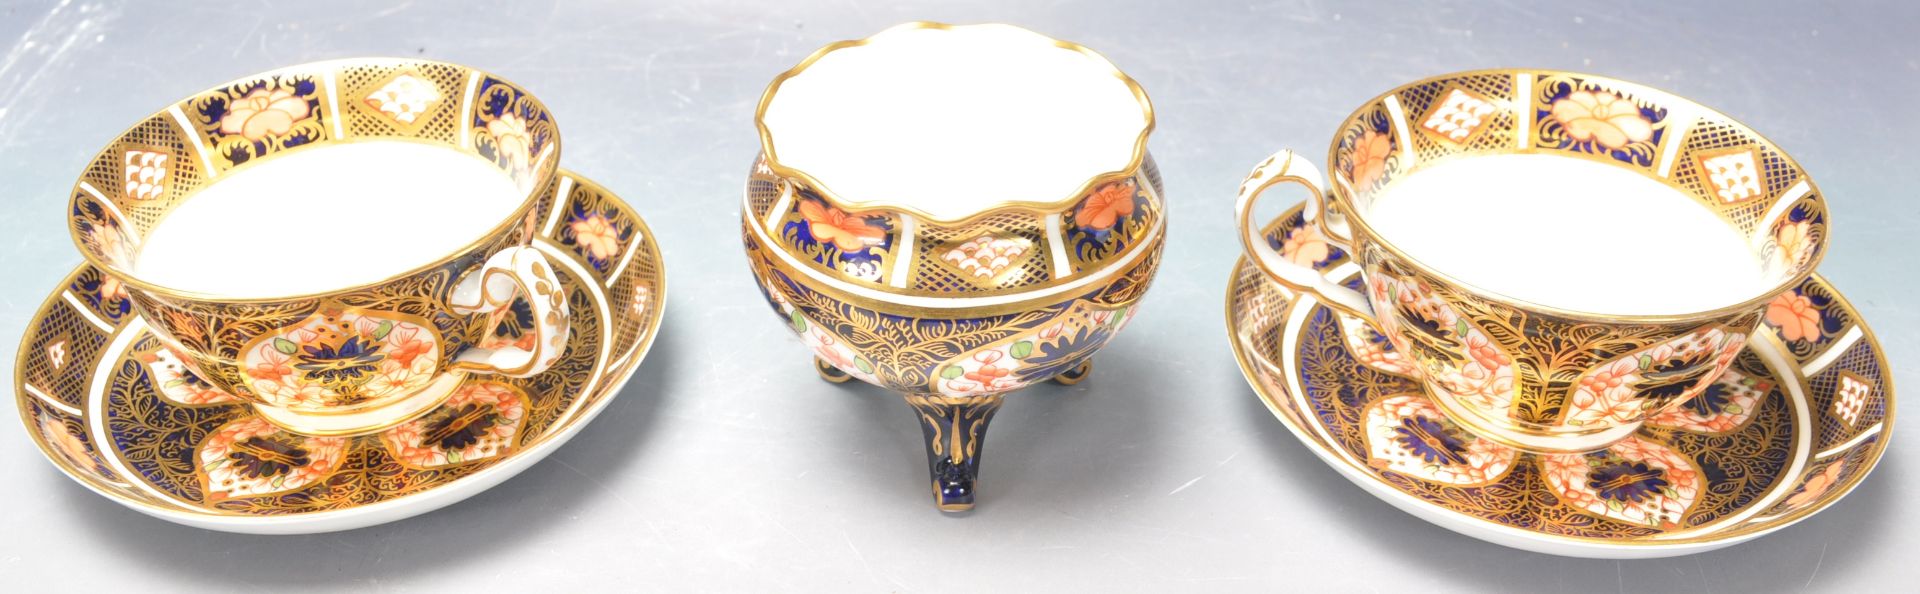 COLLECTION OF 1920S ROYAL CROWN DERBY IMARI CUPS AND SAUCERS - Image 3 of 6